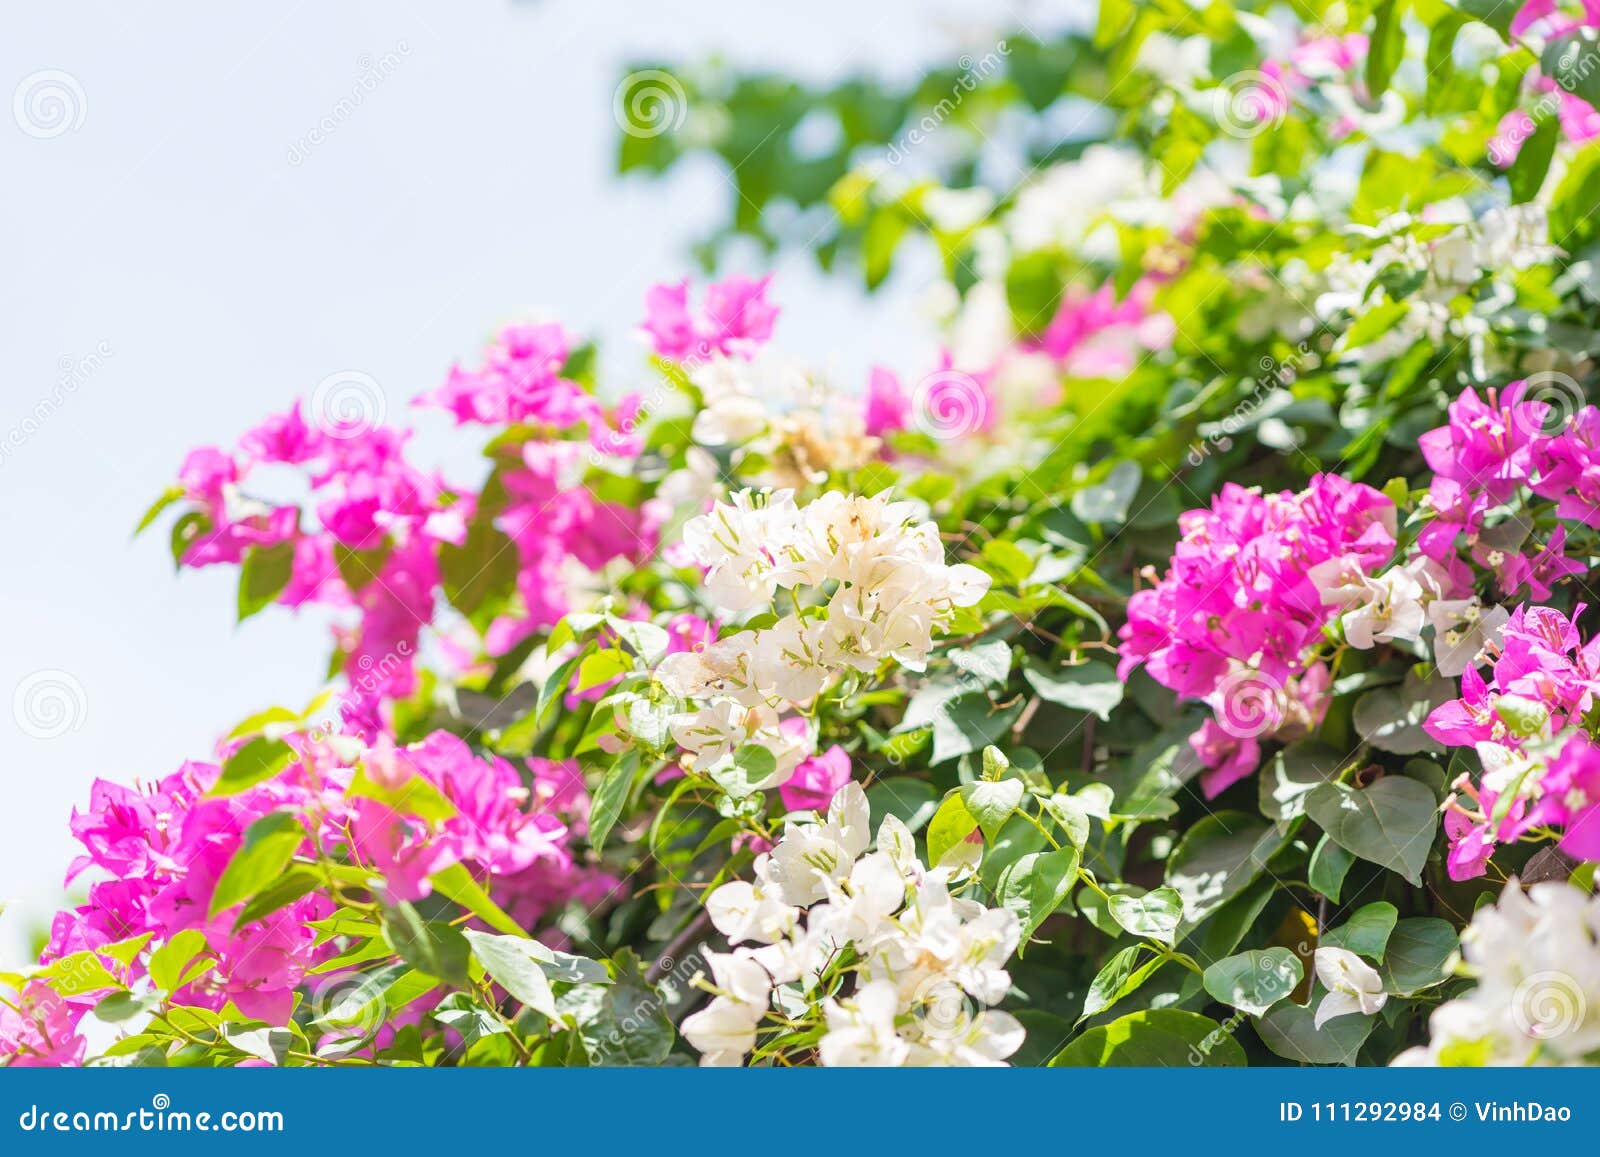 Bougainvillea Pink and White Flower. Blossoming Bougainvillea Stock ...